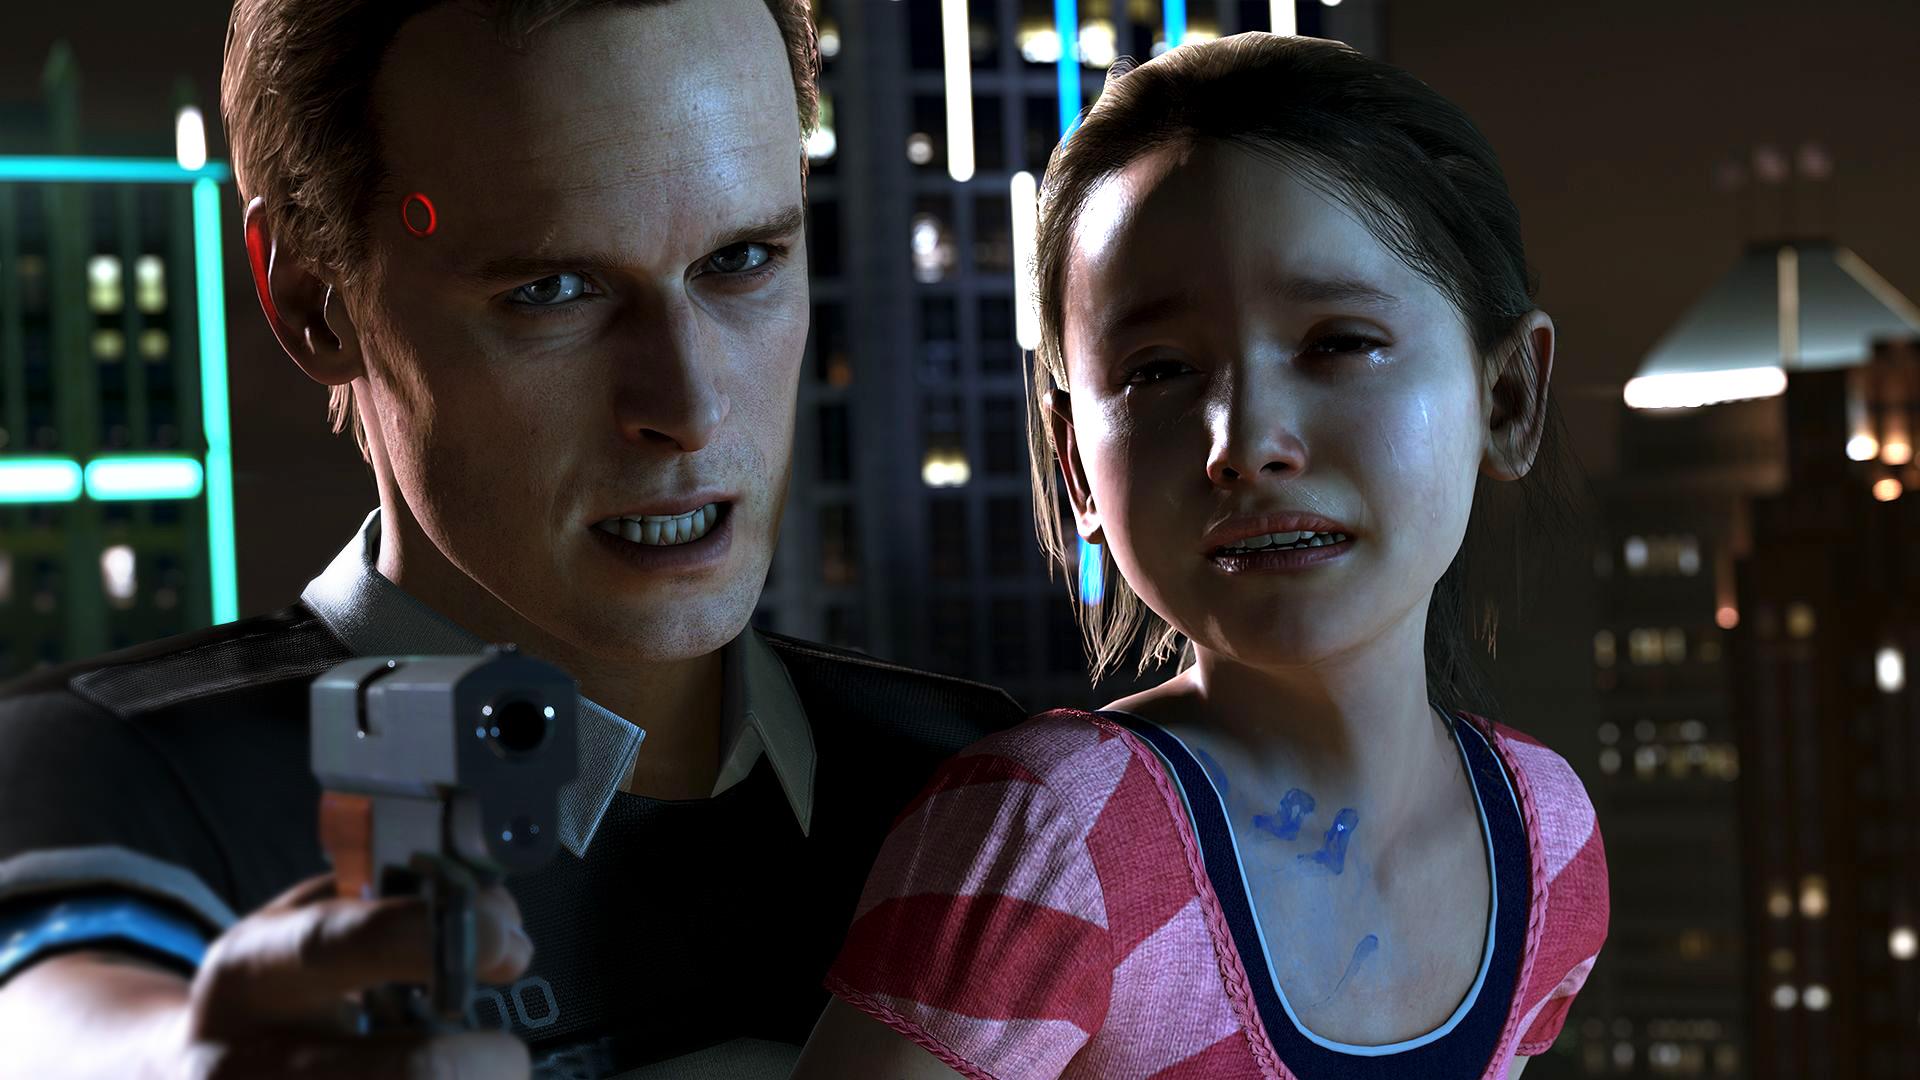 Image for 4K HDR! Detroit: Become Human PS4 Pro Gameplay